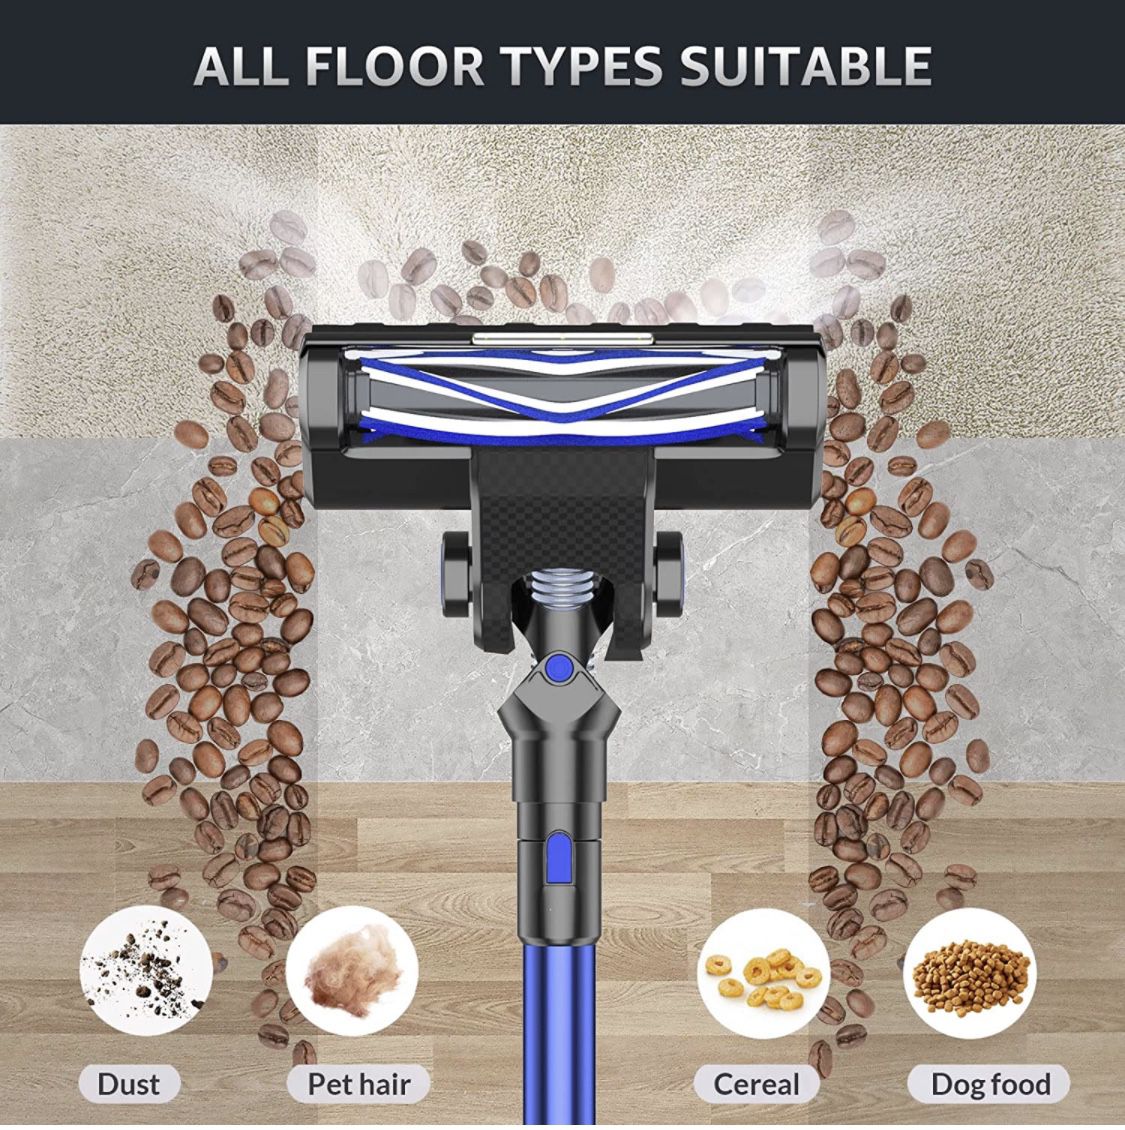 FirstLove Cordless Vacuum Cleaner - High Suction Lightweight Stick Vacuum with Up to 45 Mins Runtime